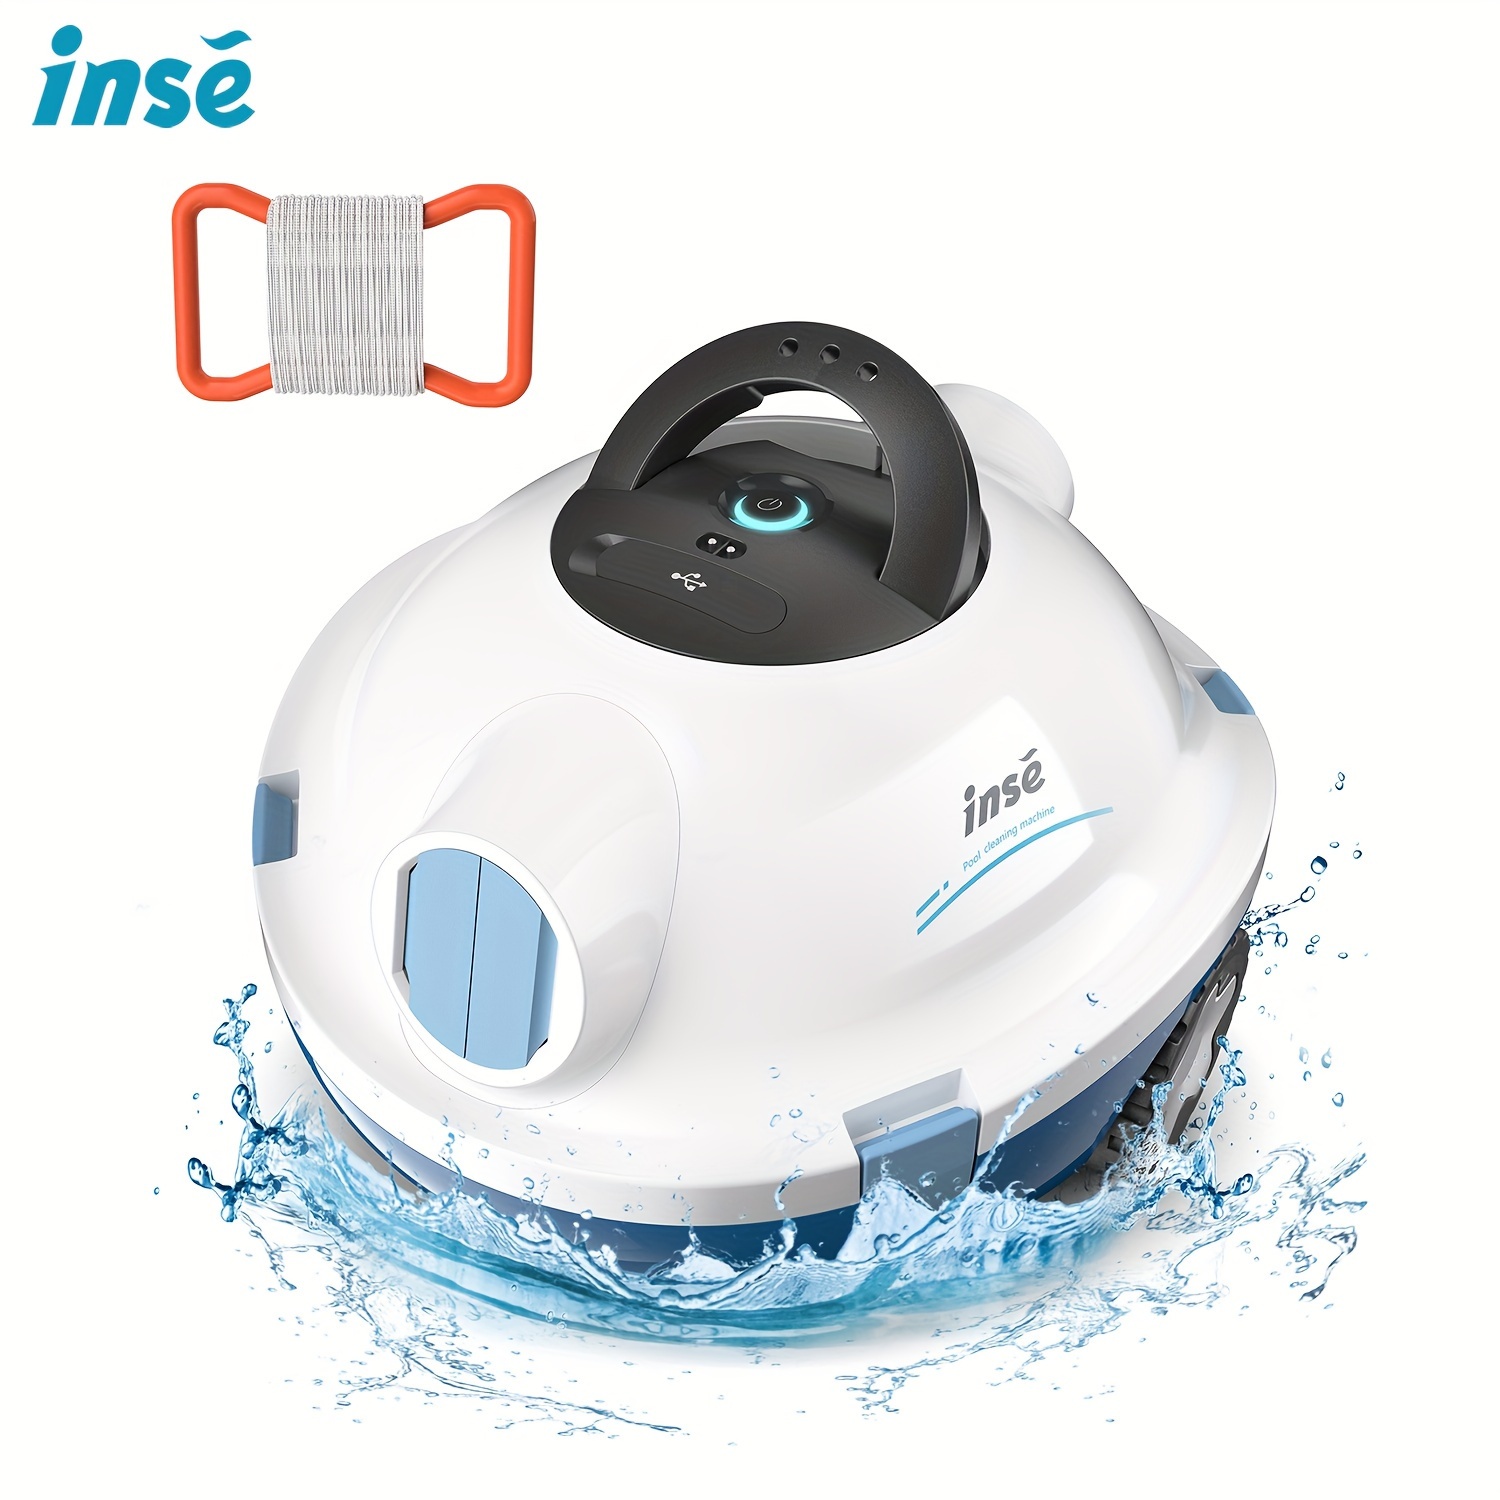 

Inse Cordless Robotic Pool Cleaner, Automatic Pool Vacuum, 90 Mins Runtime, Powerful, Self-parking, Lightweight, Ideal For Flat Above/in-ground Pool Up To 65 Feet/1100 Sq.ft